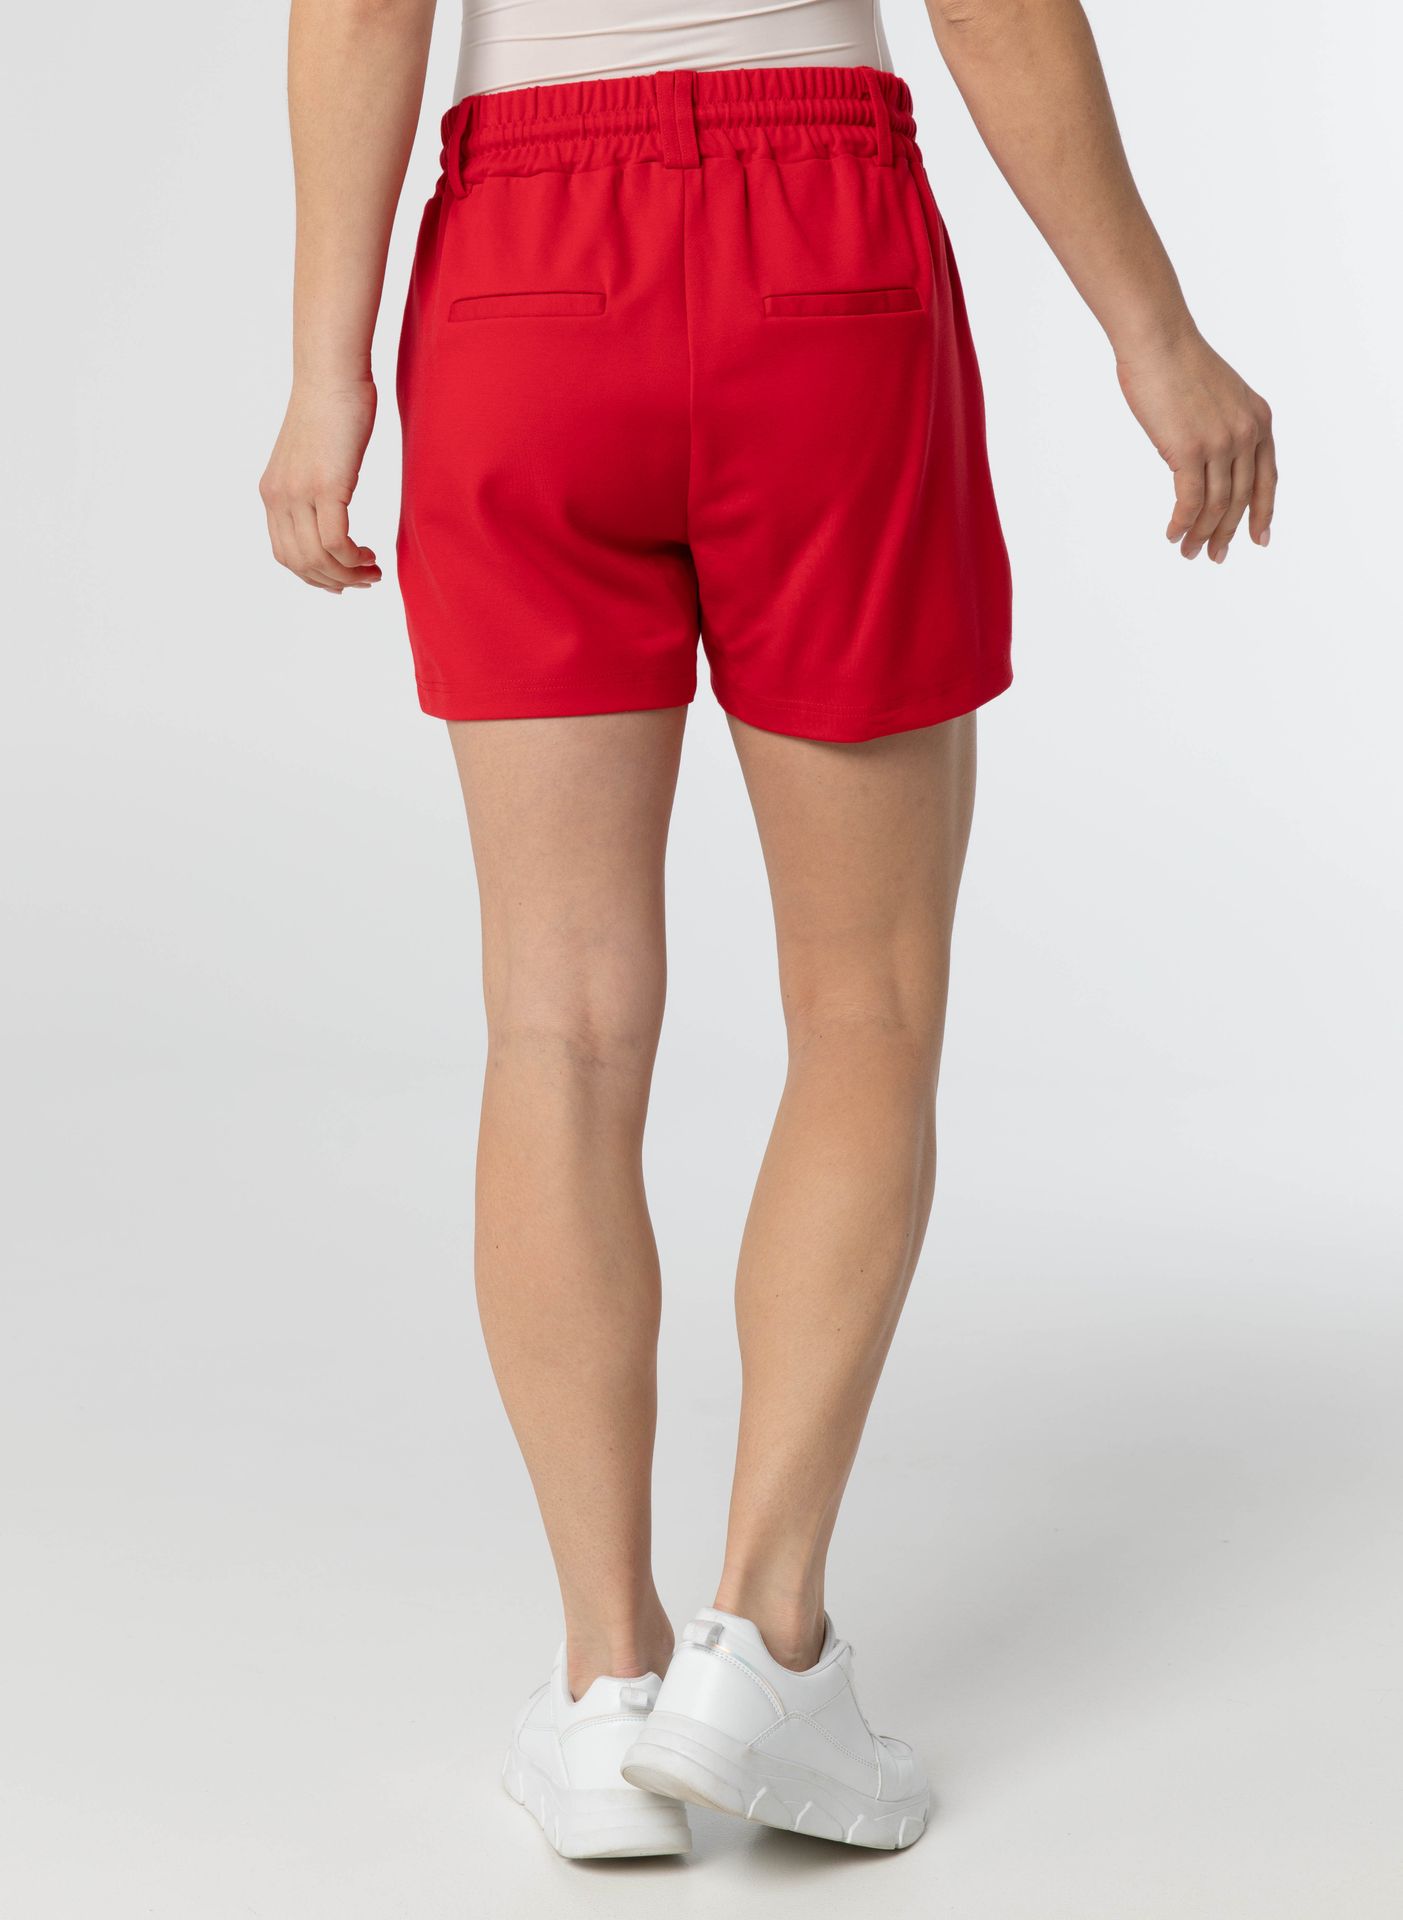 Norah Short rood red 212487-600